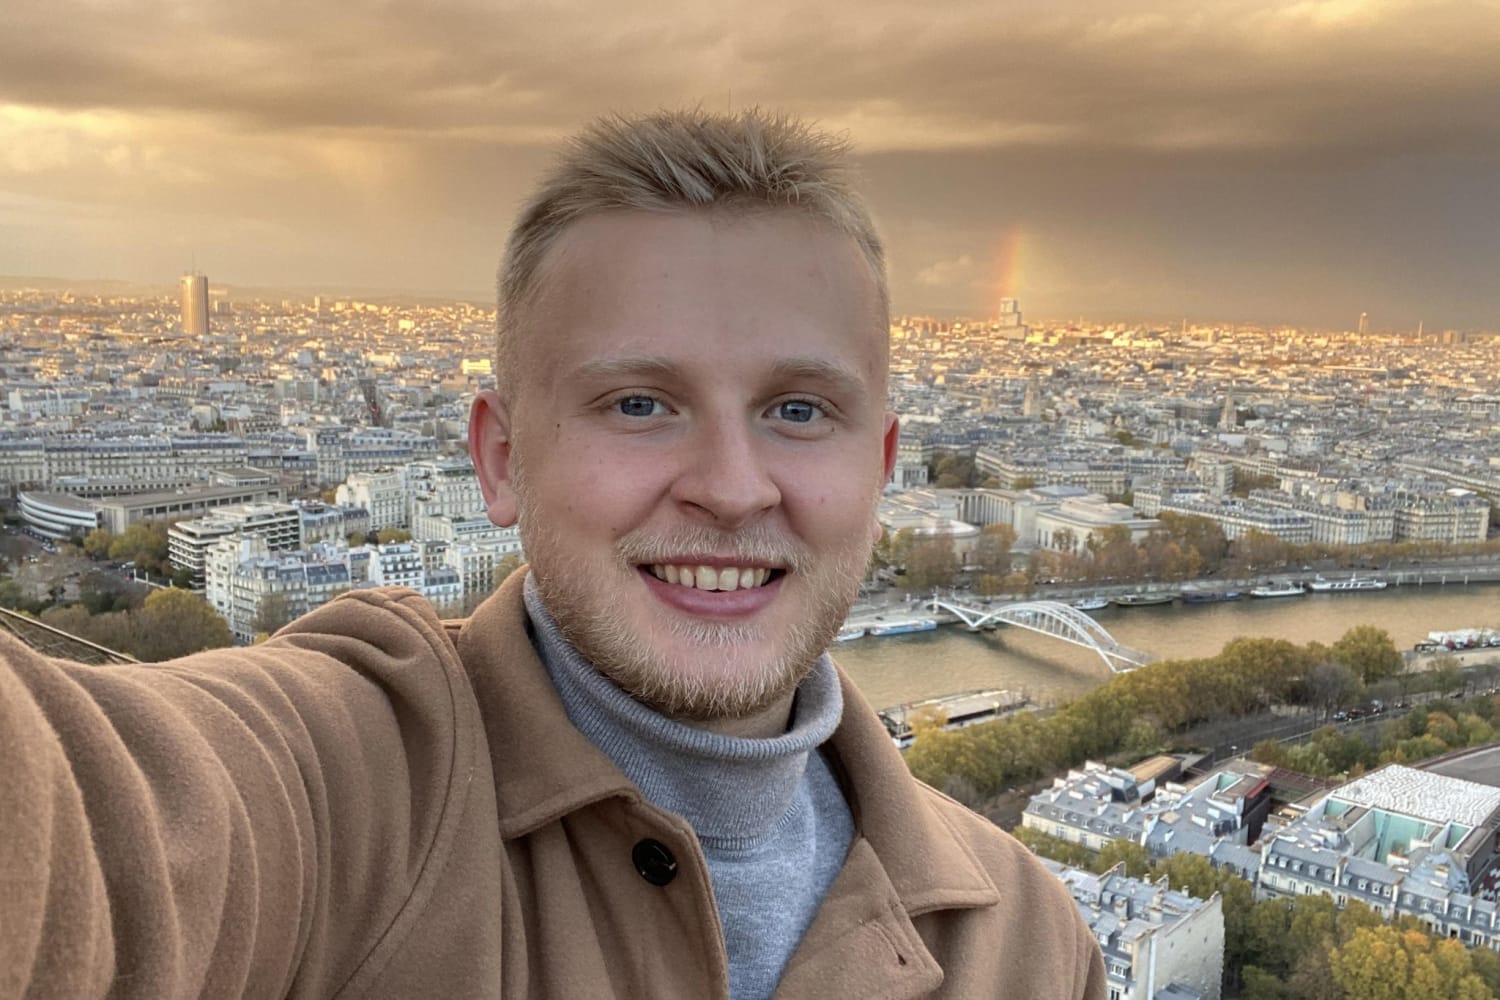 Missing college student reunited with family and heading back to U.S., French officials say